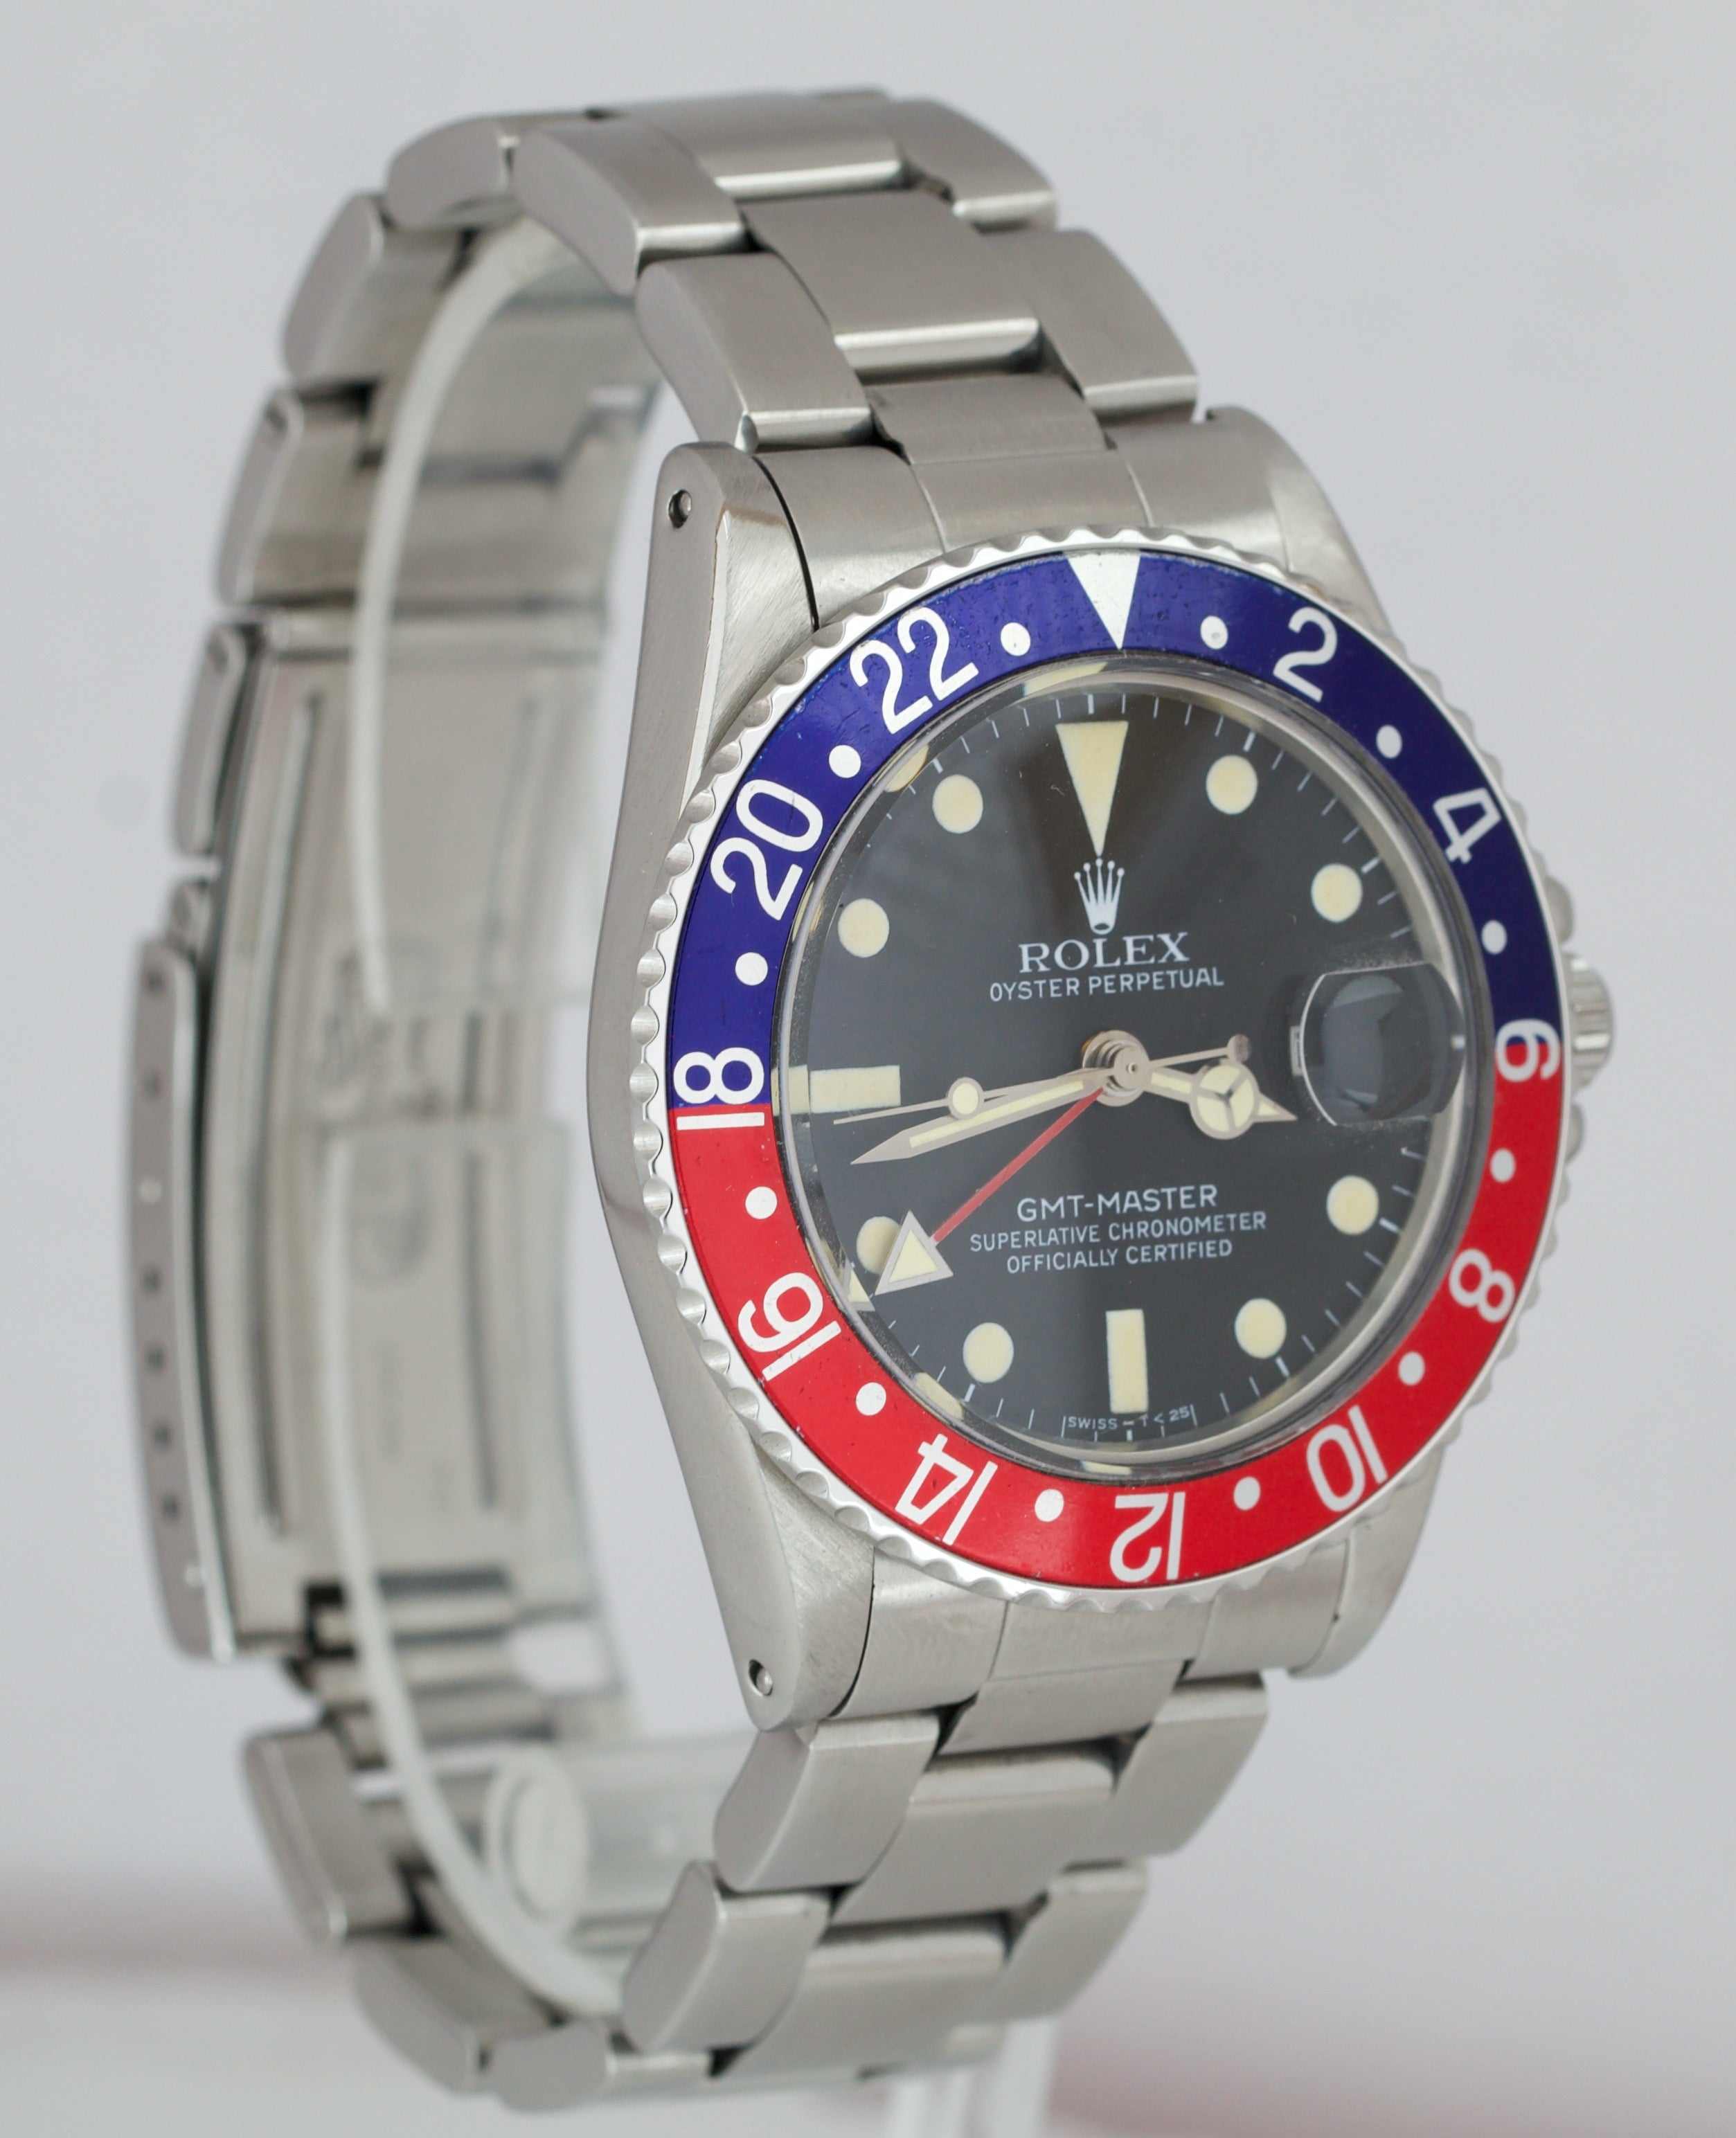 COMPLETE Vintage 1982 Rolex GMT-Master 16750 Pepsi Red Blue Patina CREAMY Watch